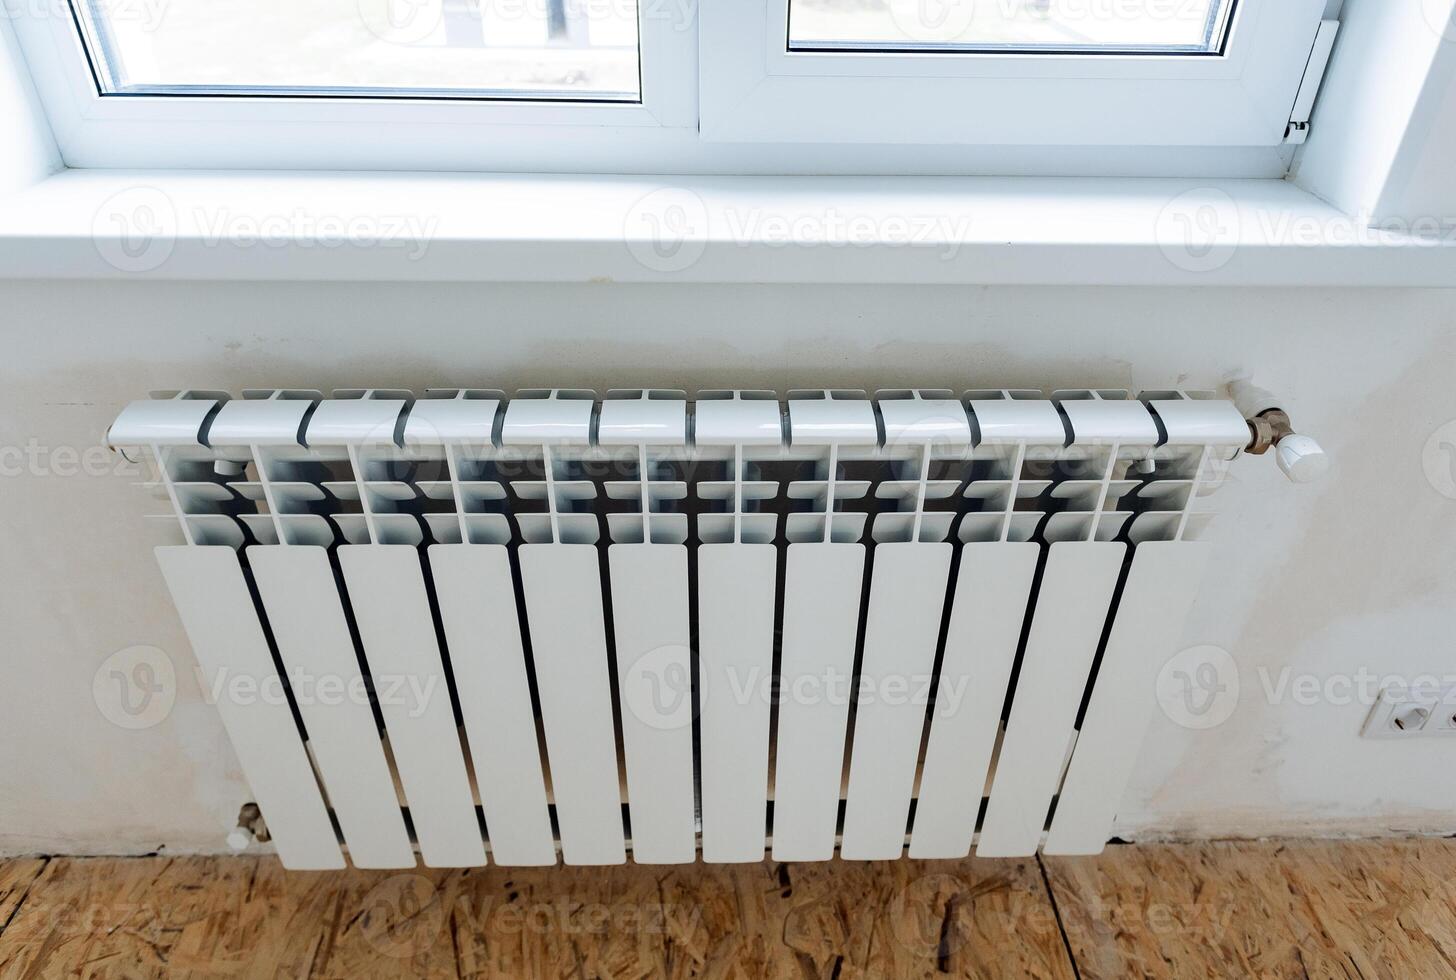 Thermal con heater at home, hot air battery hanging under the window, metal air temperature heater in the house, indoor plumbing photo